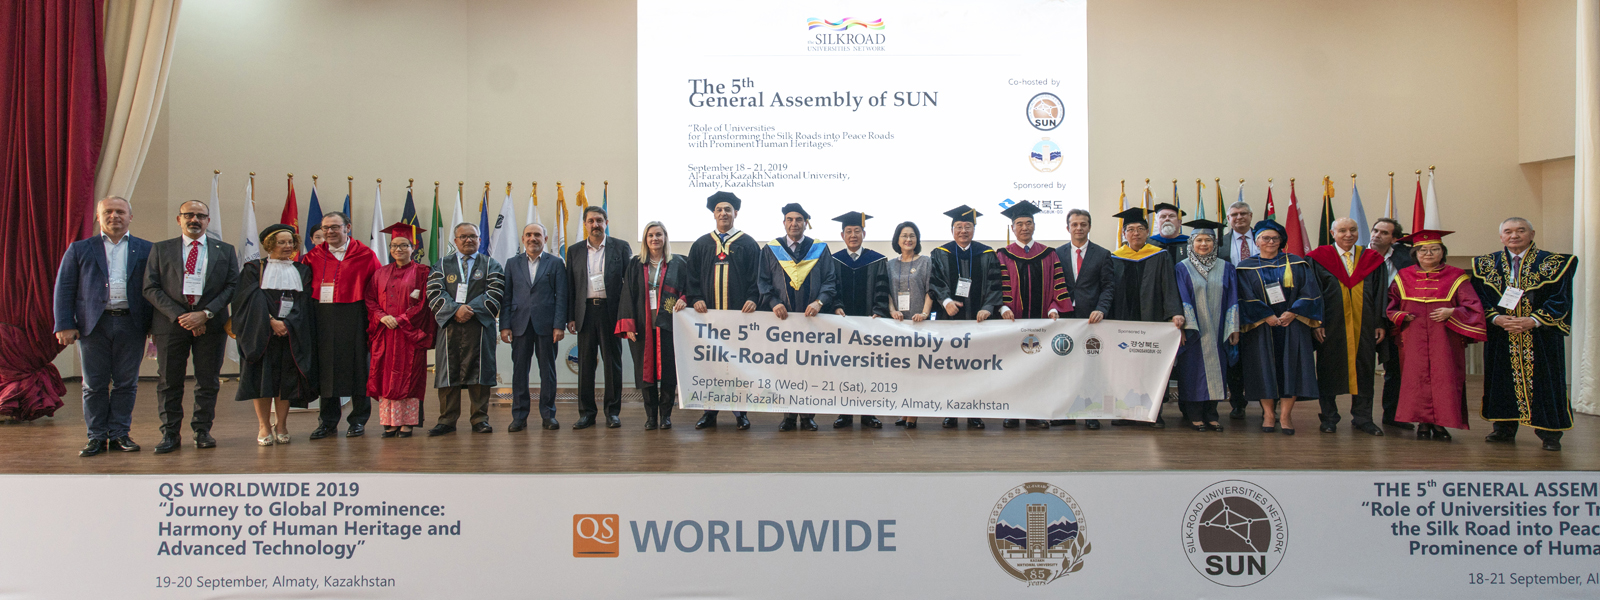 The 5th general assembly of Silk Road Universities